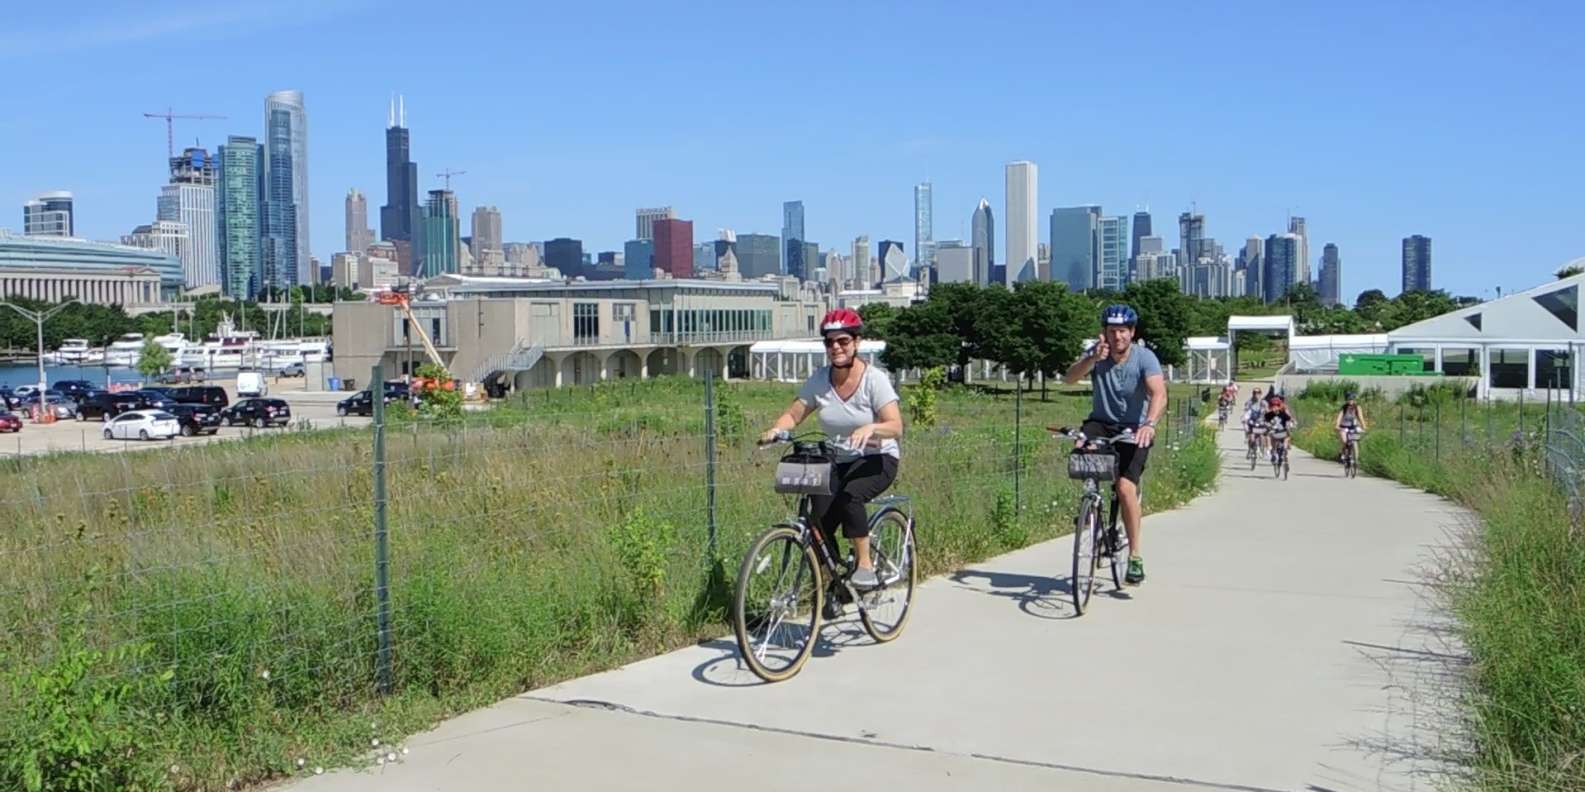 There will be a 93-kilometer bike trail in Chicago